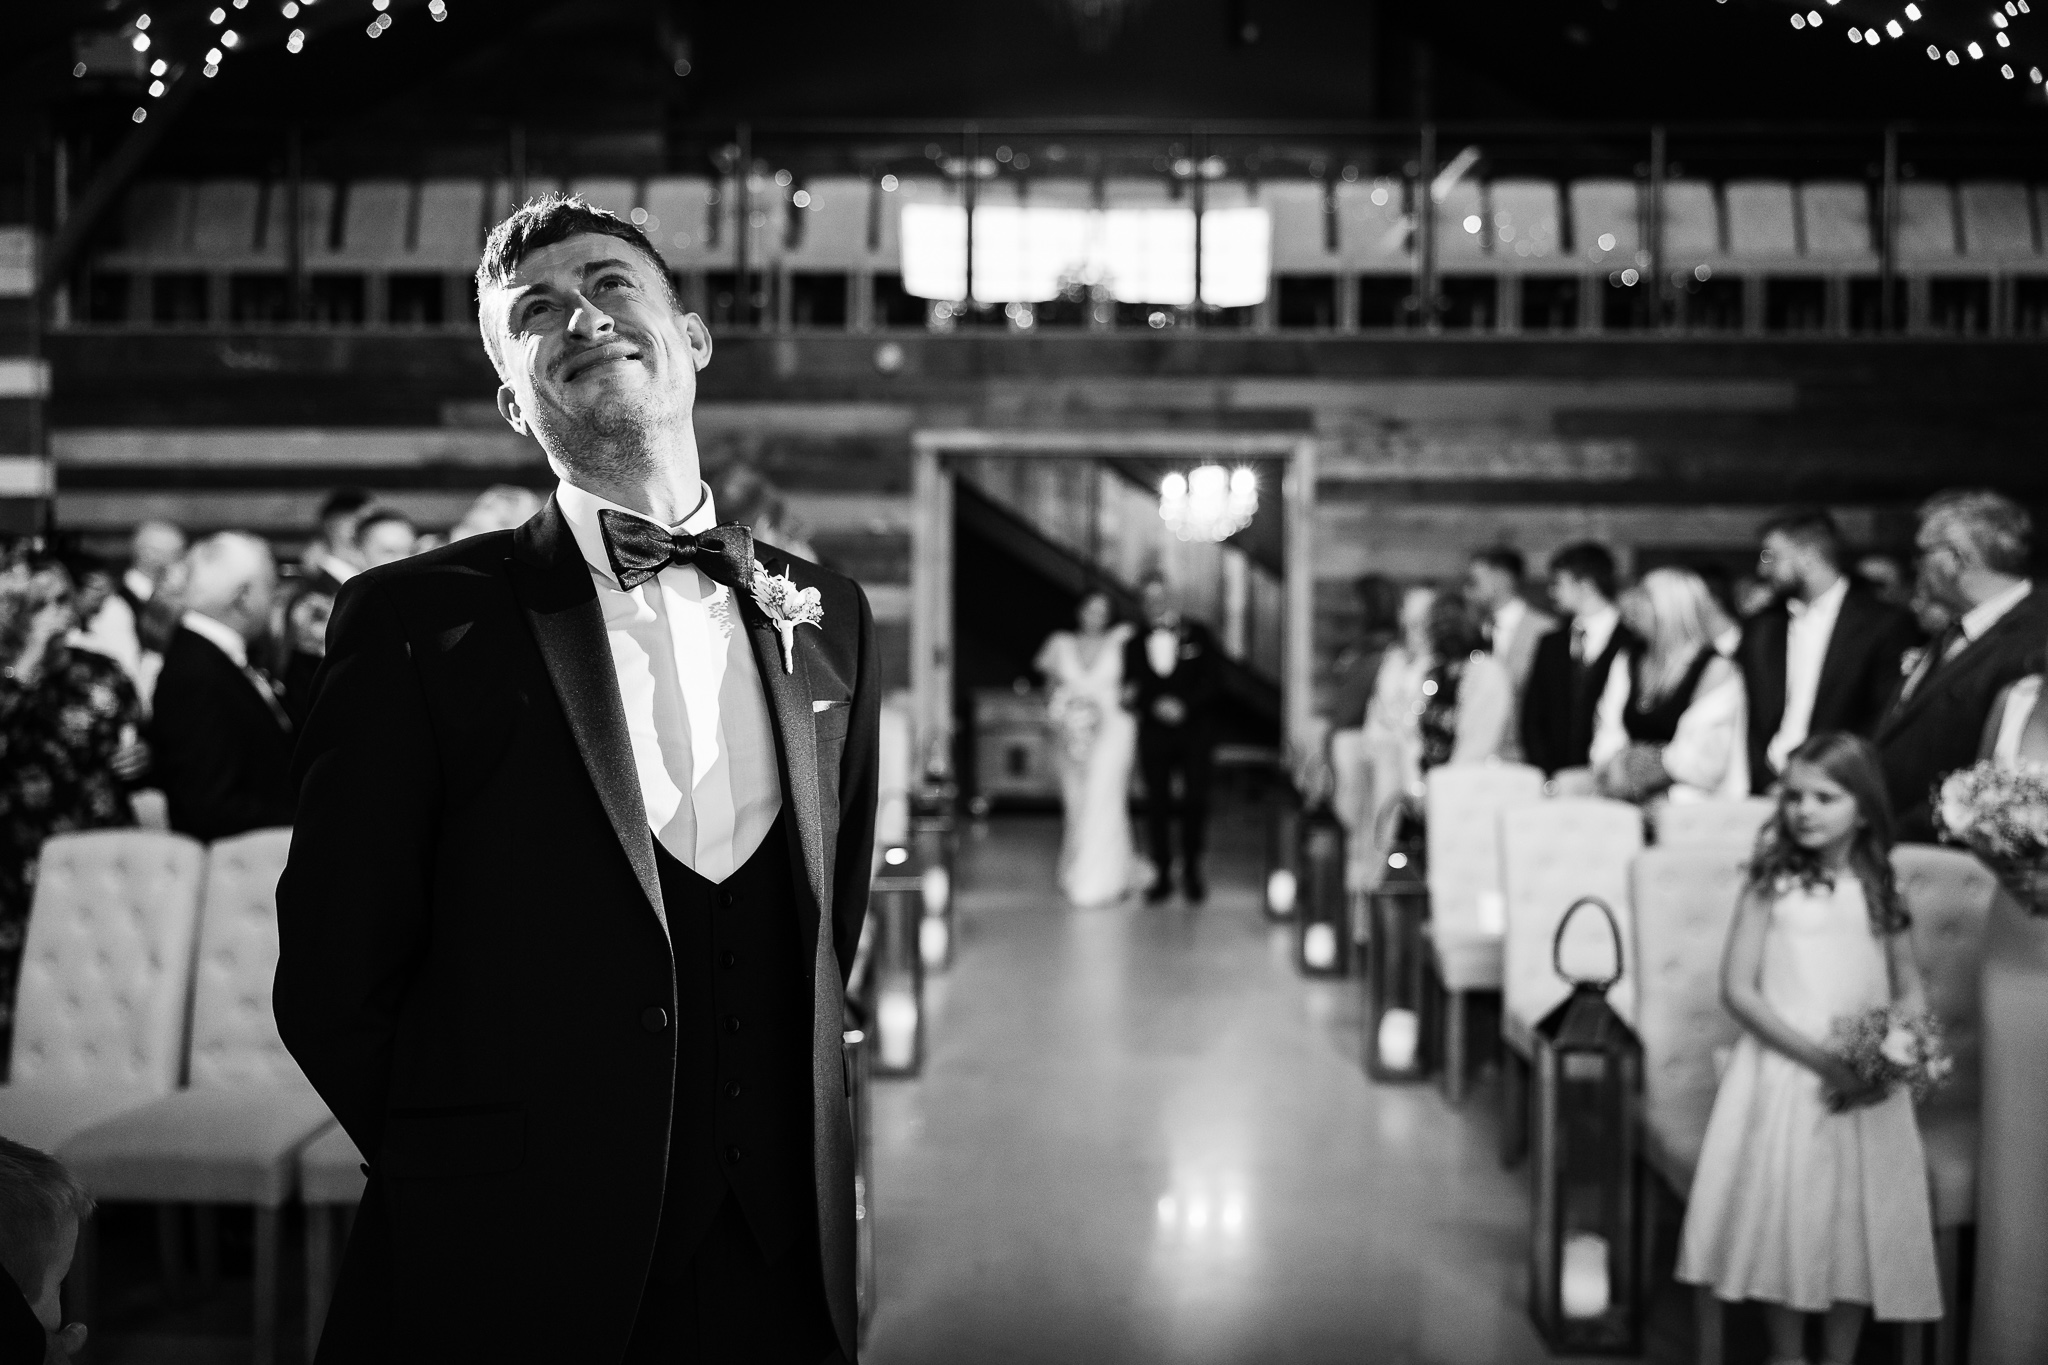 Emotional Groom wearing a Tuxedo at his Yorkshire Wedding Ceremony 